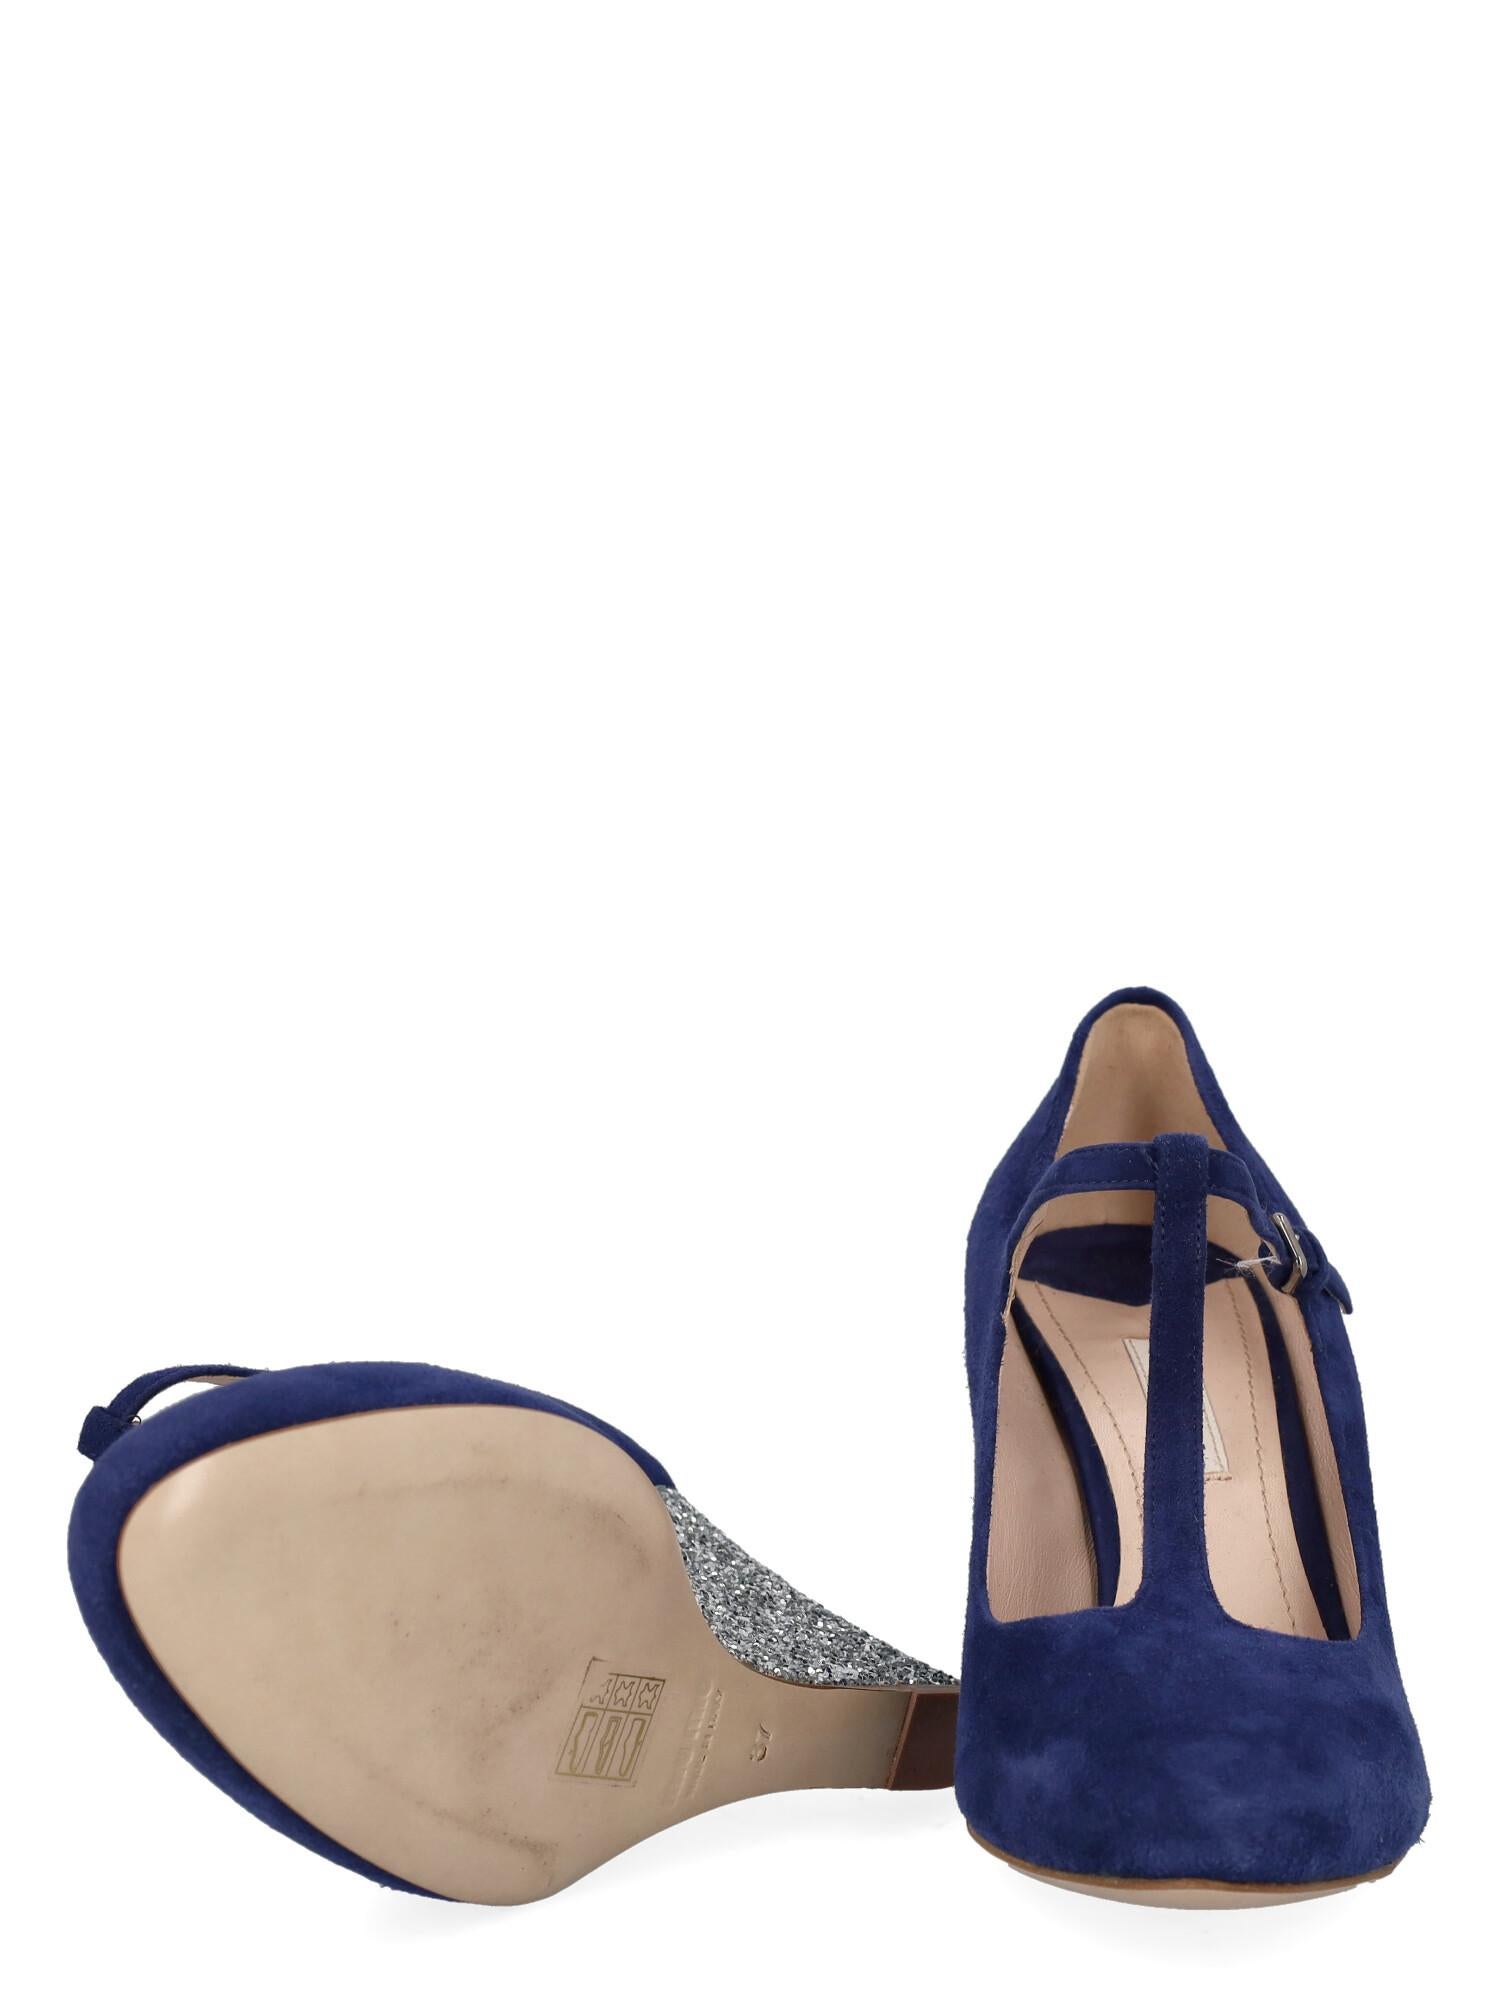 Miu Miu Women Wedges Navy Leather EU 37 In Good Condition For Sale In Milan, IT